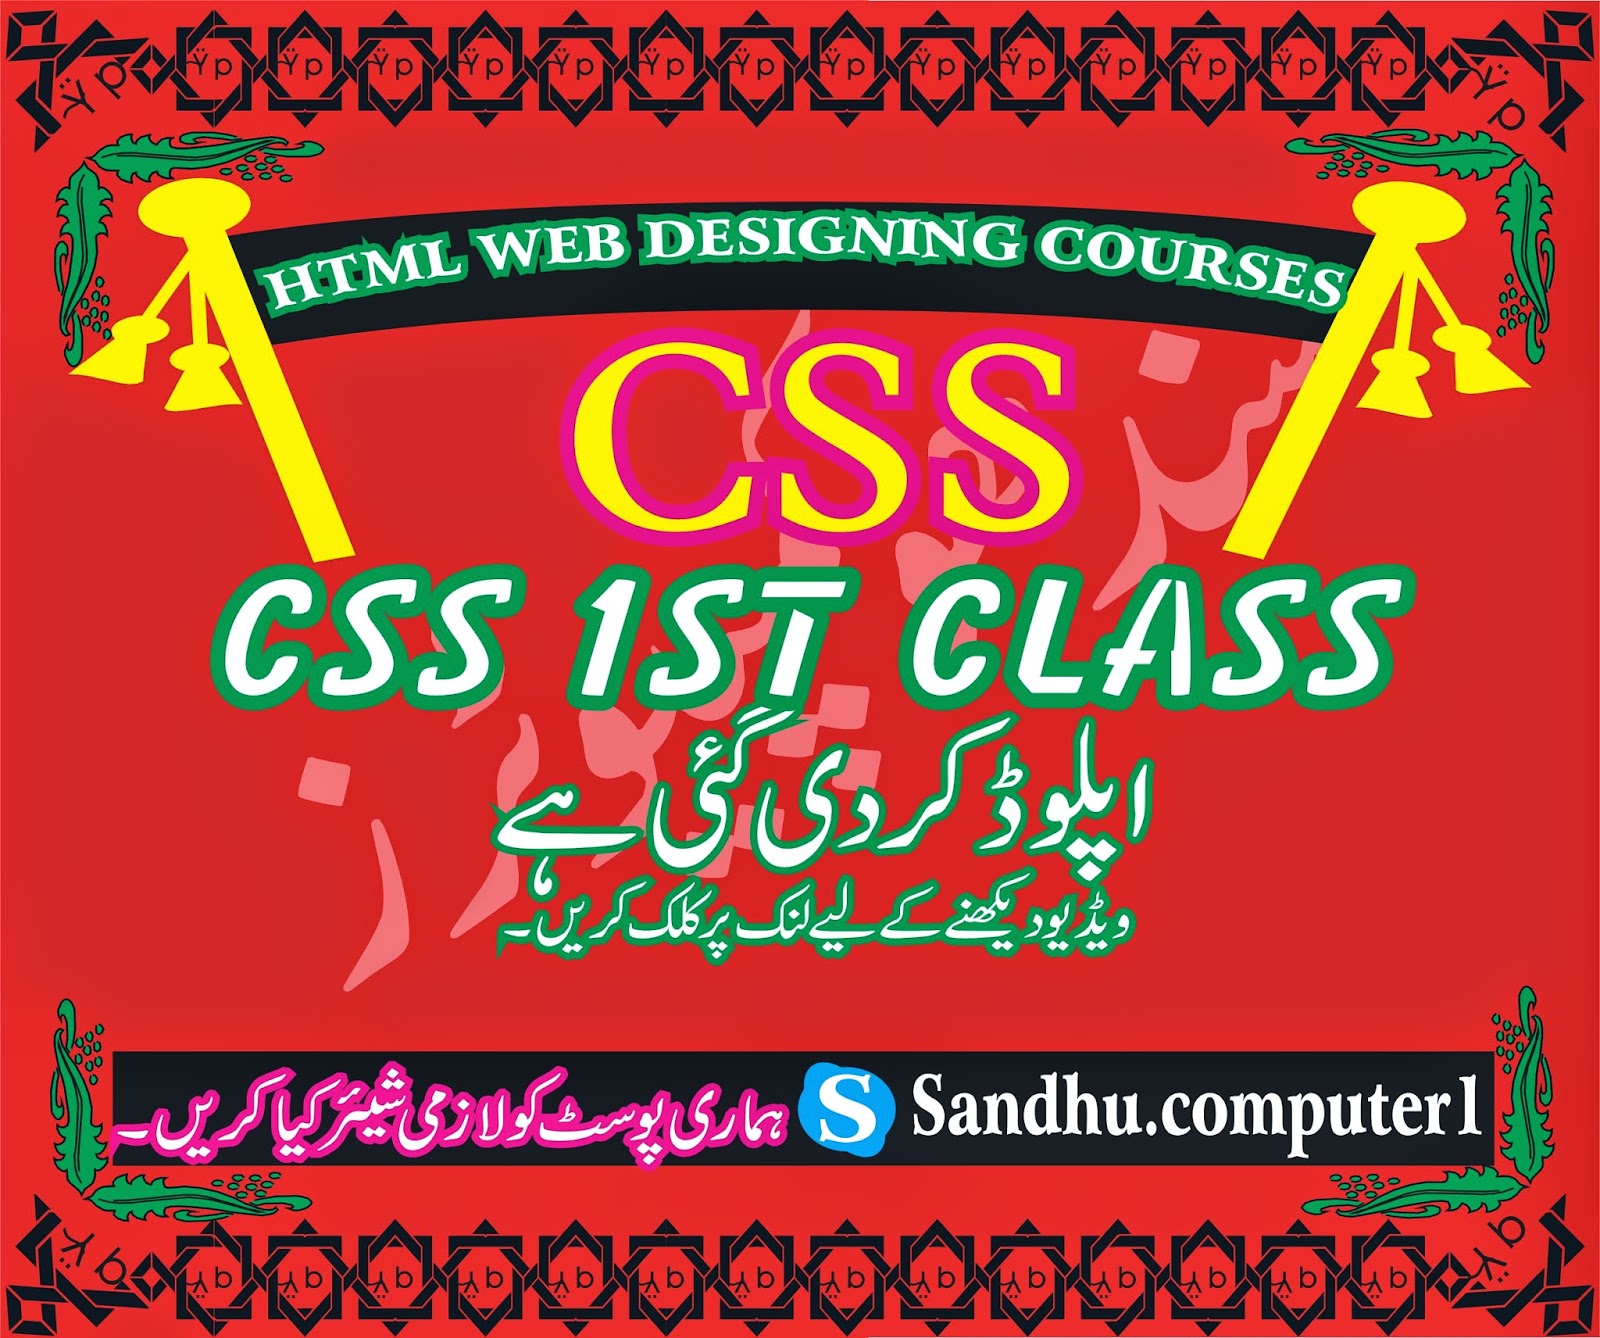 CSS 1st class with sandhu computers